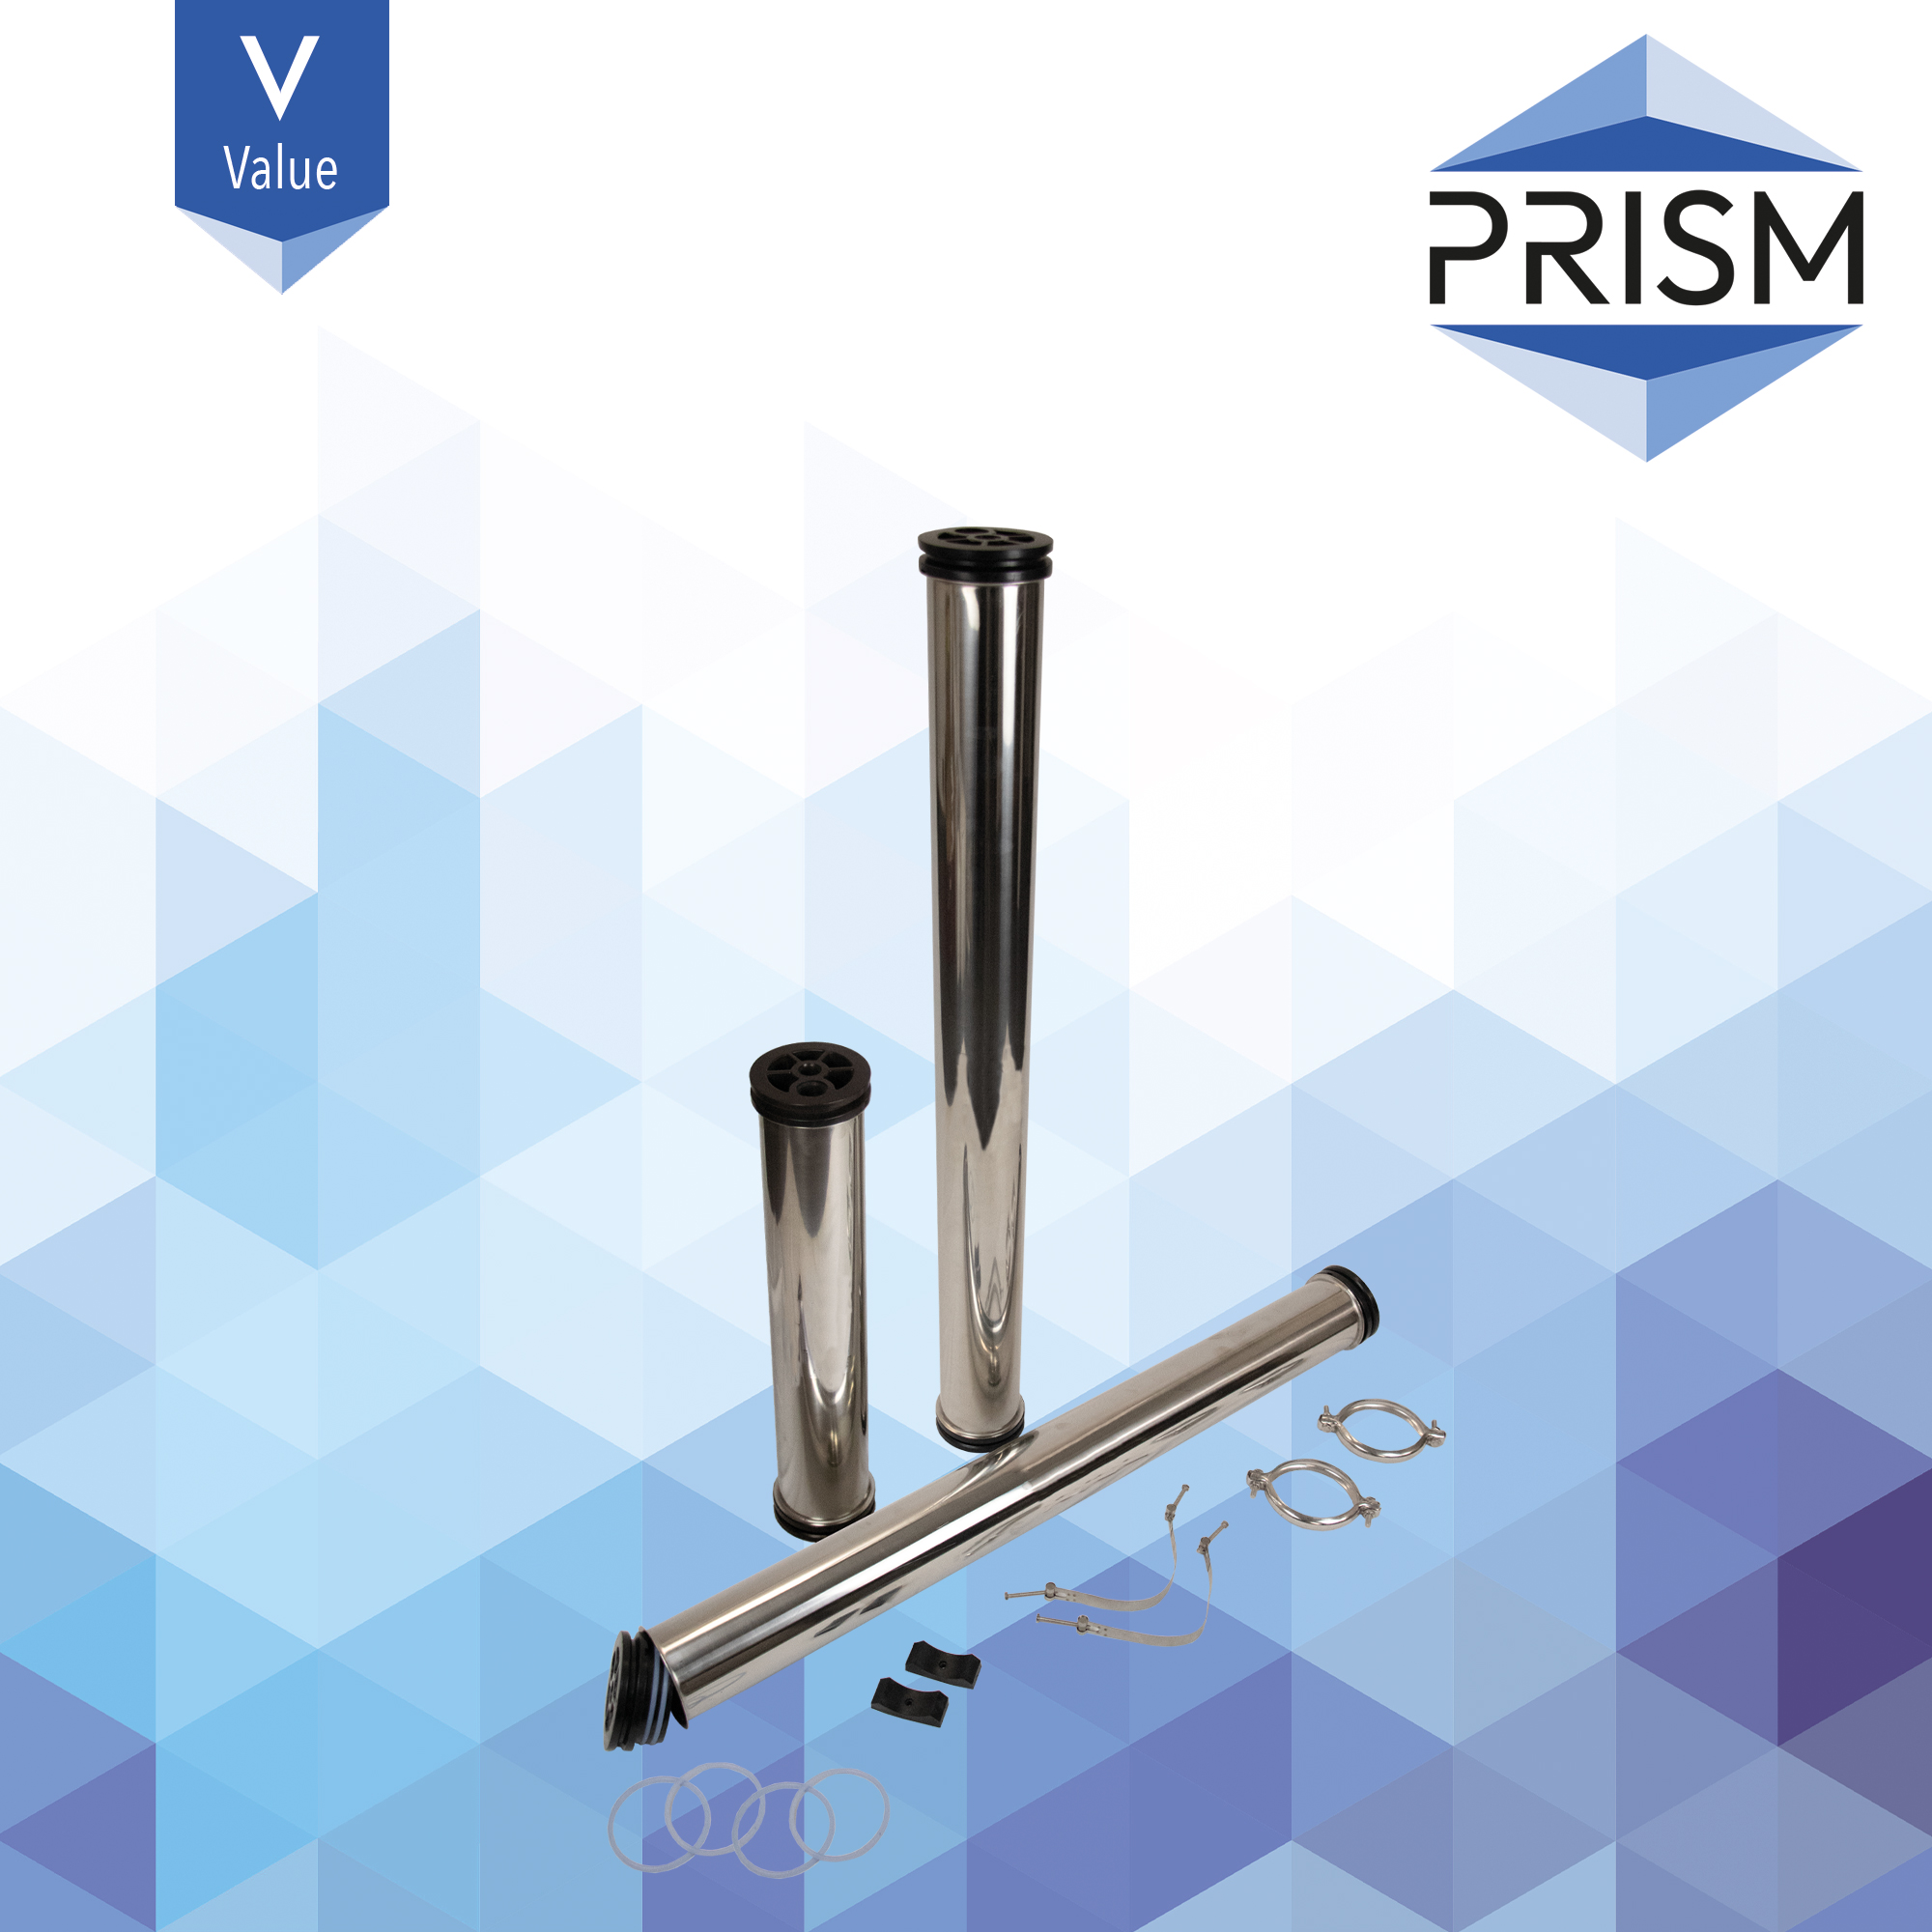 ROH-SS-4x40-1/2x3/4-V    PRISM VALUE RANGE :  Stainless Steel Membrane Housing 4 x 40